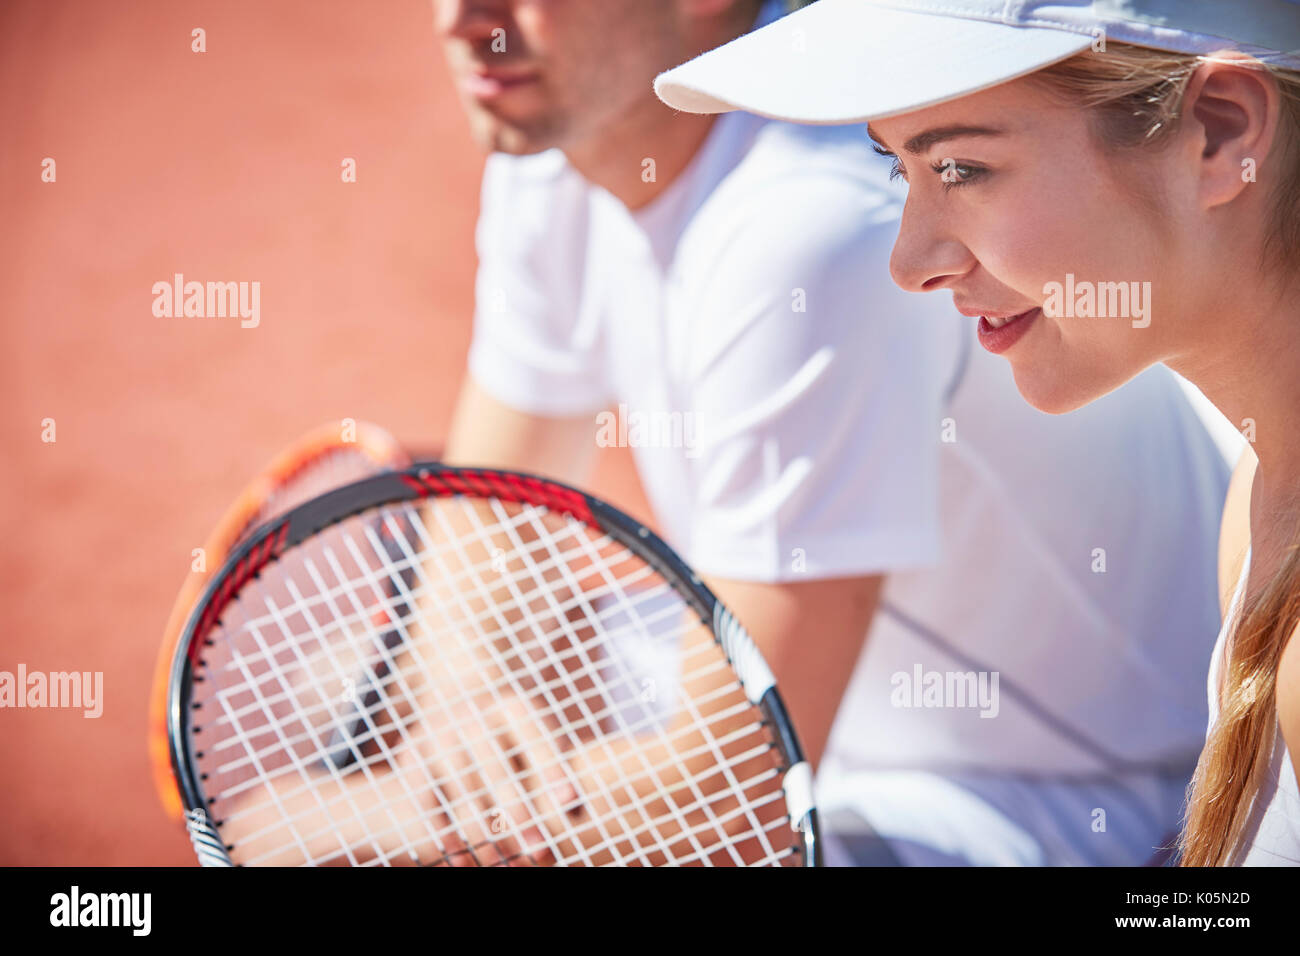 Smiling, confident young woman playing doubles tennis, ready with tennis racket Stock Photo